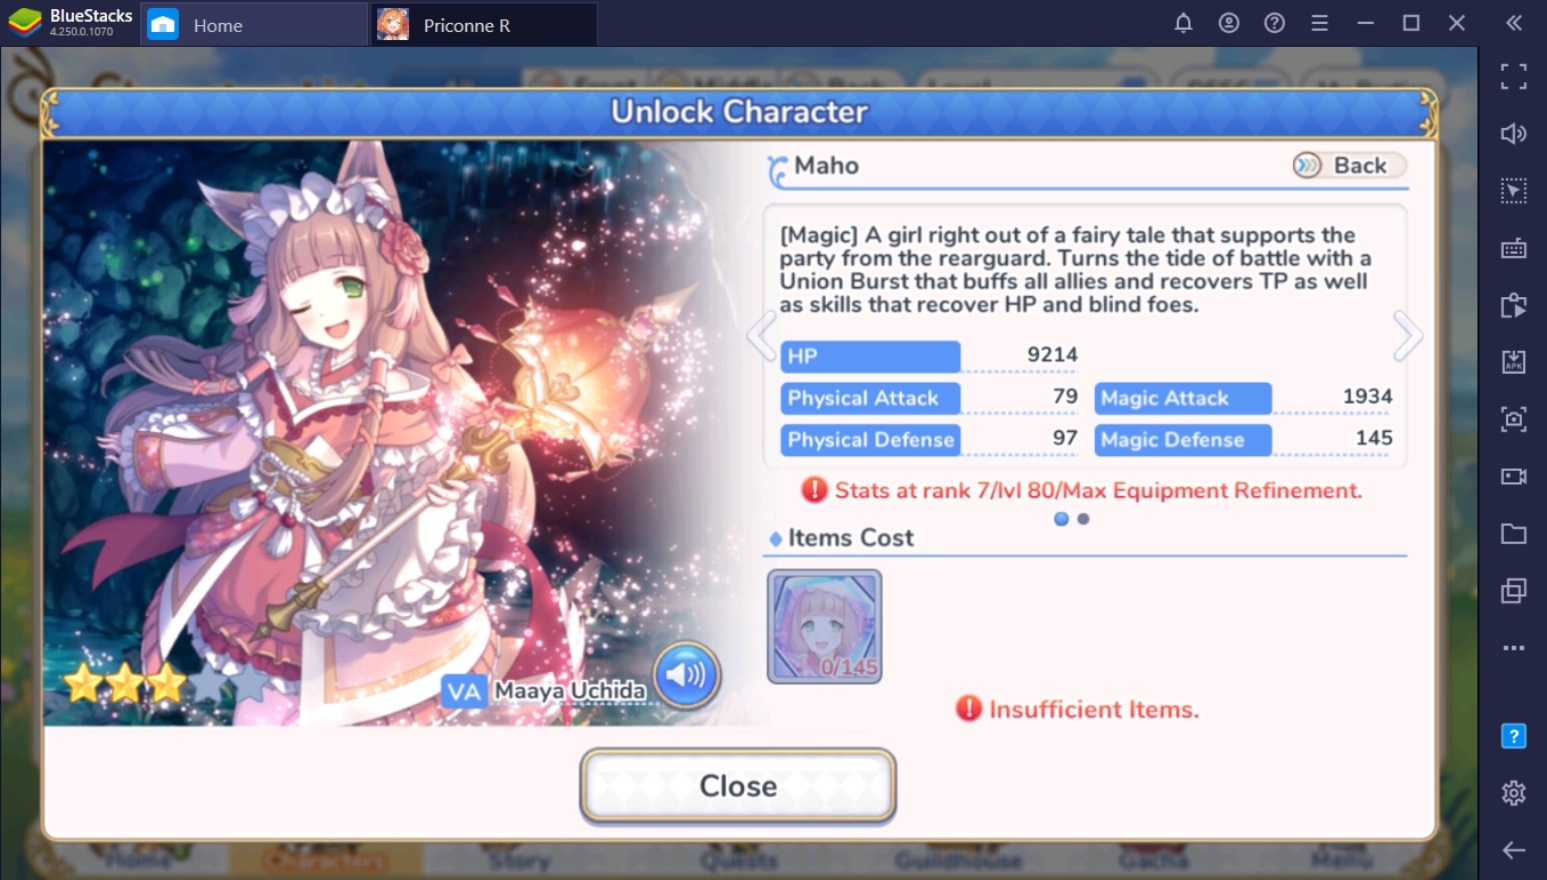 Princess Connect! Re: Dive Rerolling Guide on BlueStacks